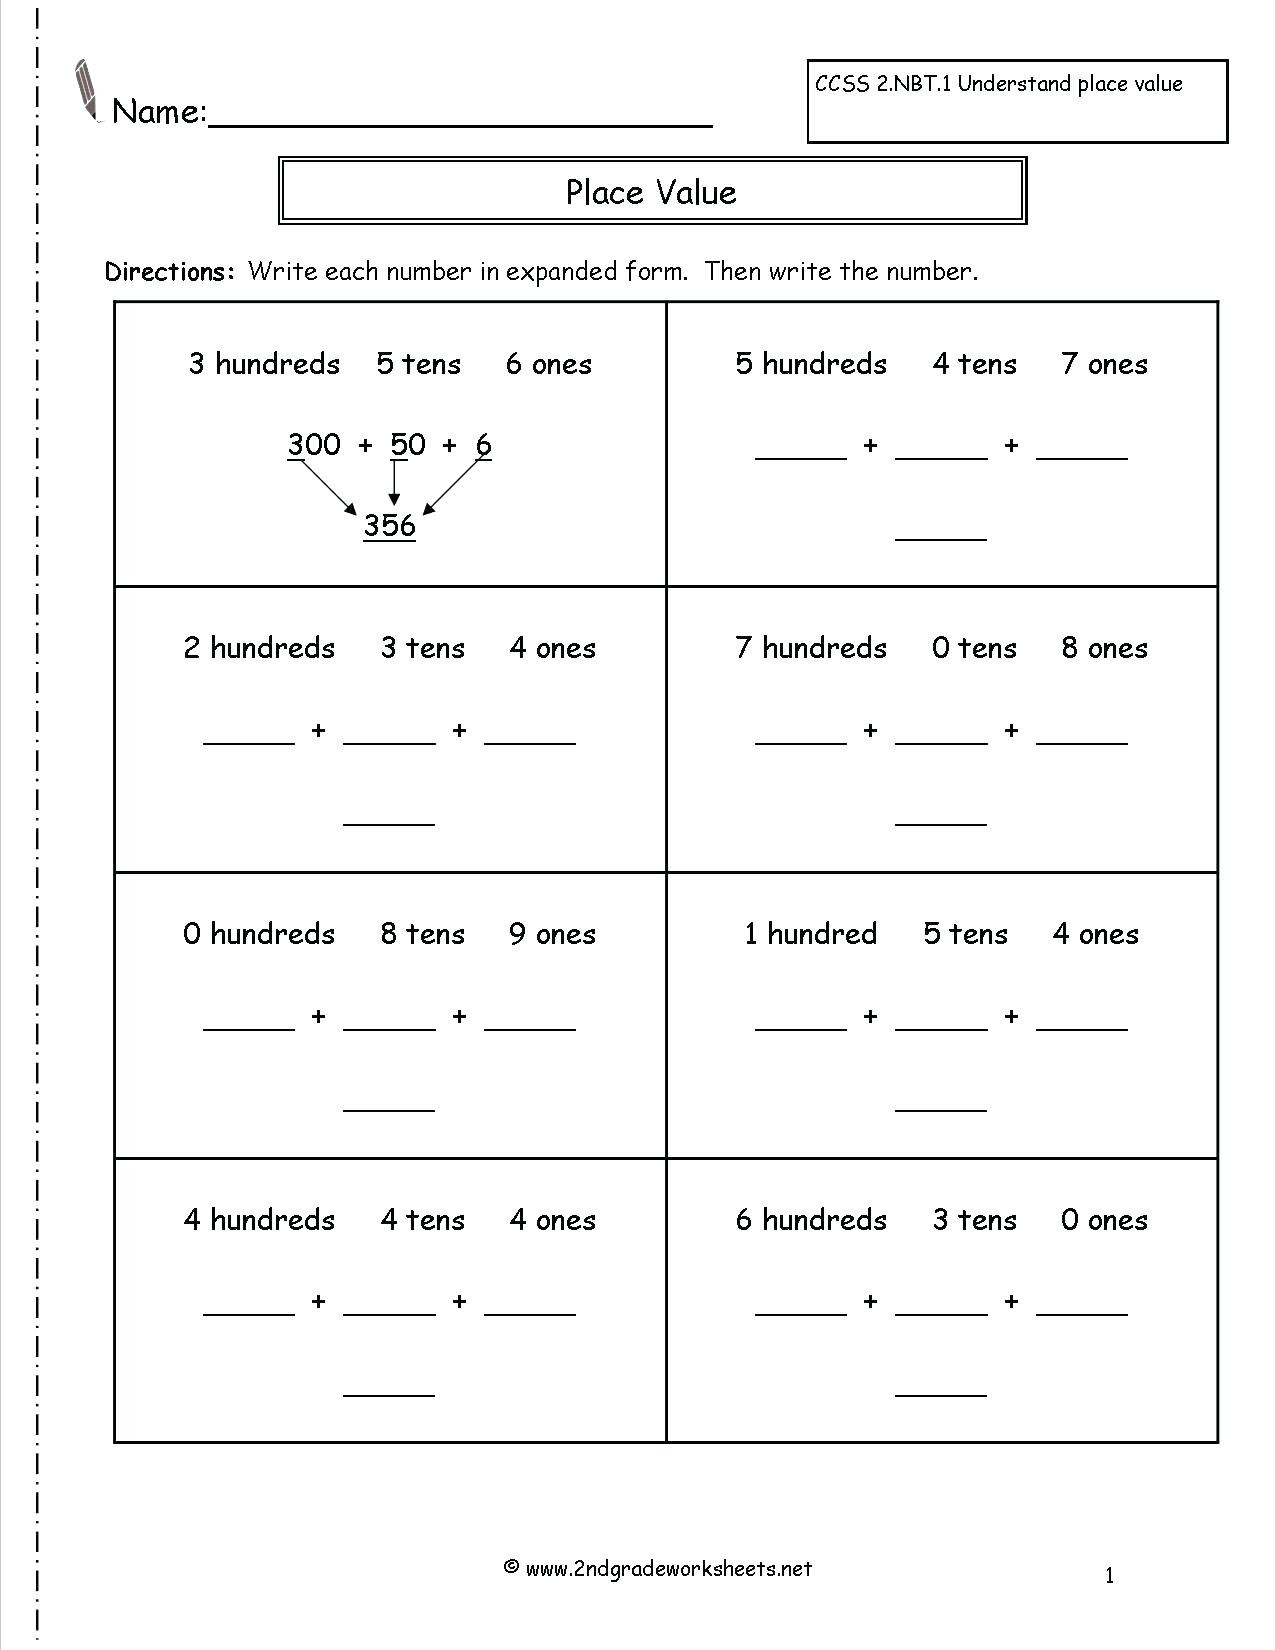 Place Value Worksheet 3rd Grade Place Value Worksheets 3rd Grade for Free Download Place